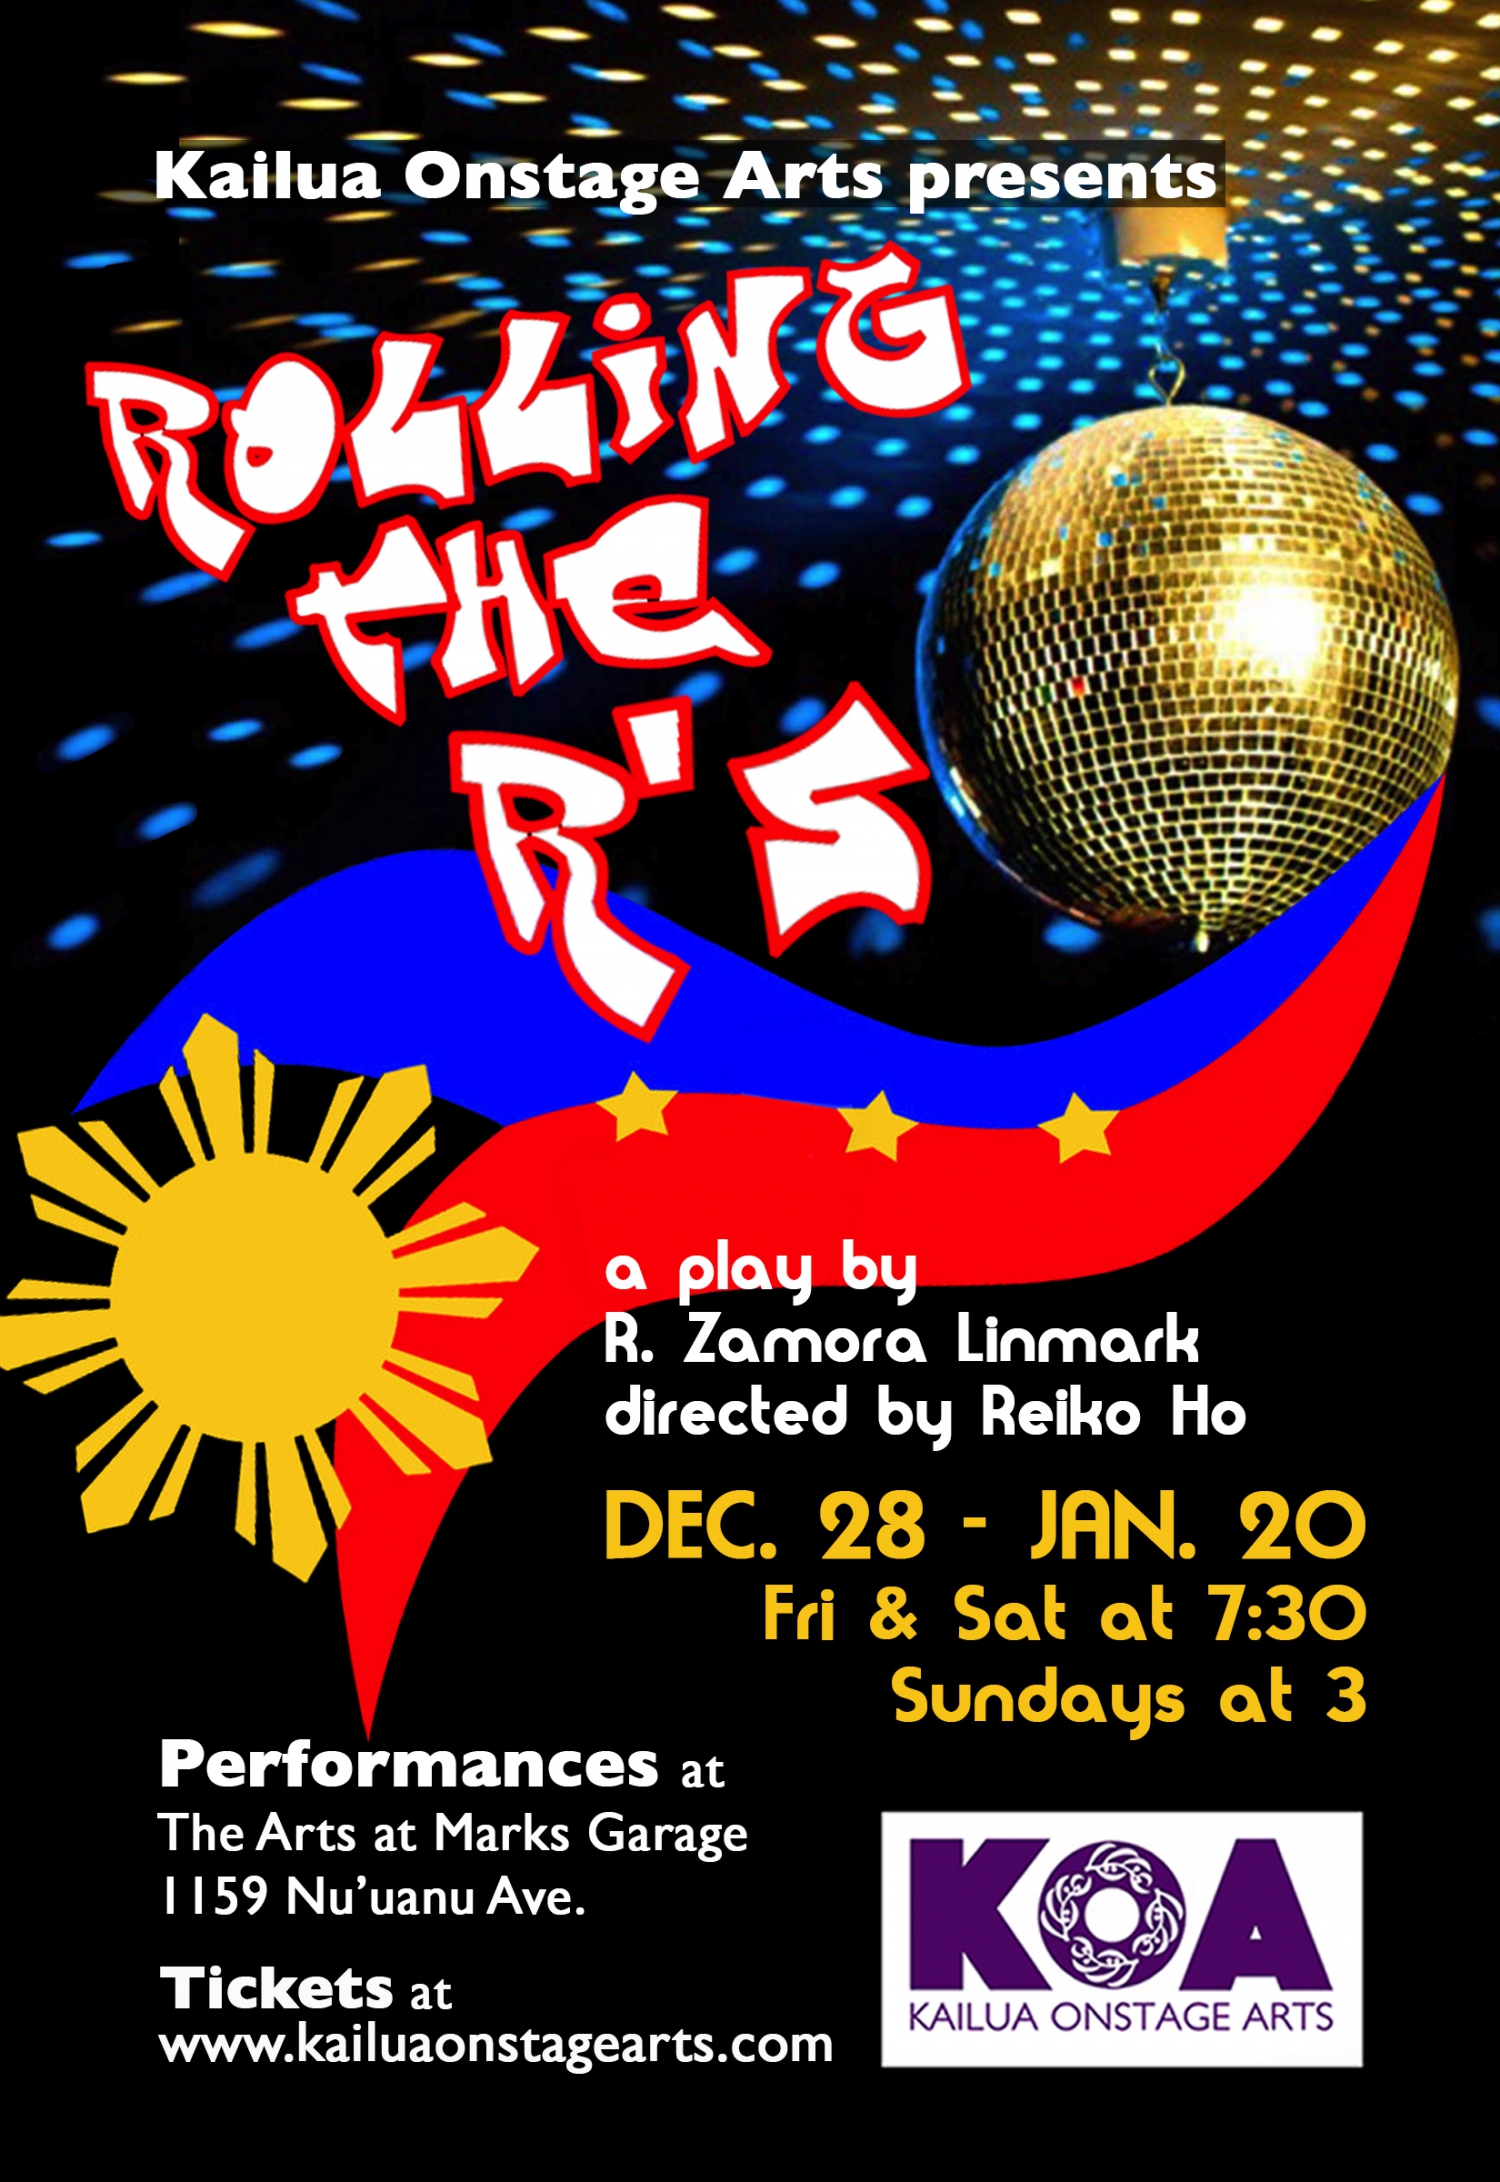 ROLLING THE R'S, a play by R. Zamora Linmark, directed by Reiko Ho